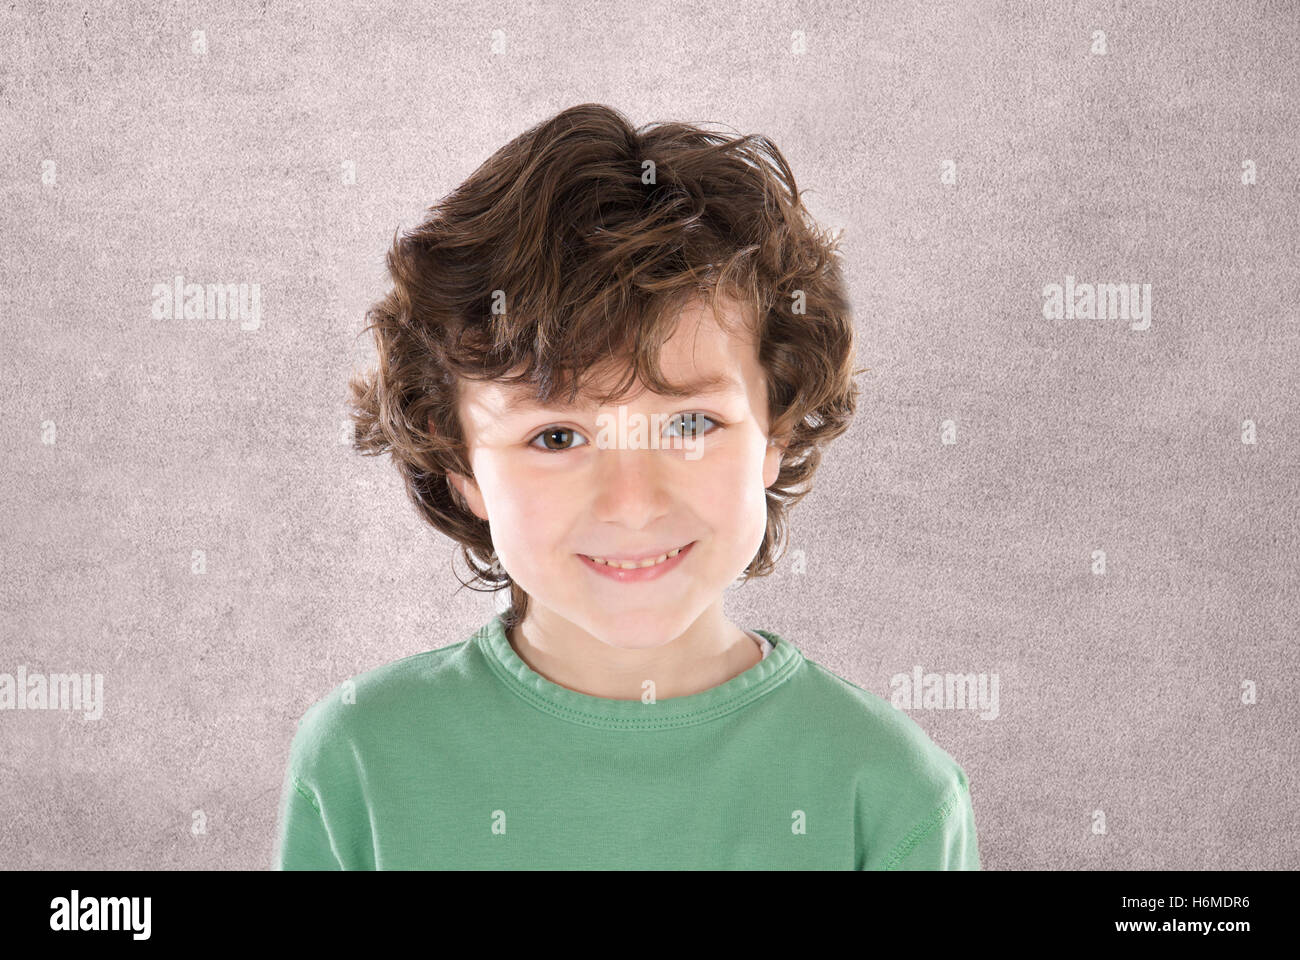 Smiling boy with six ans looking at camera sur fond gris Banque D'Images